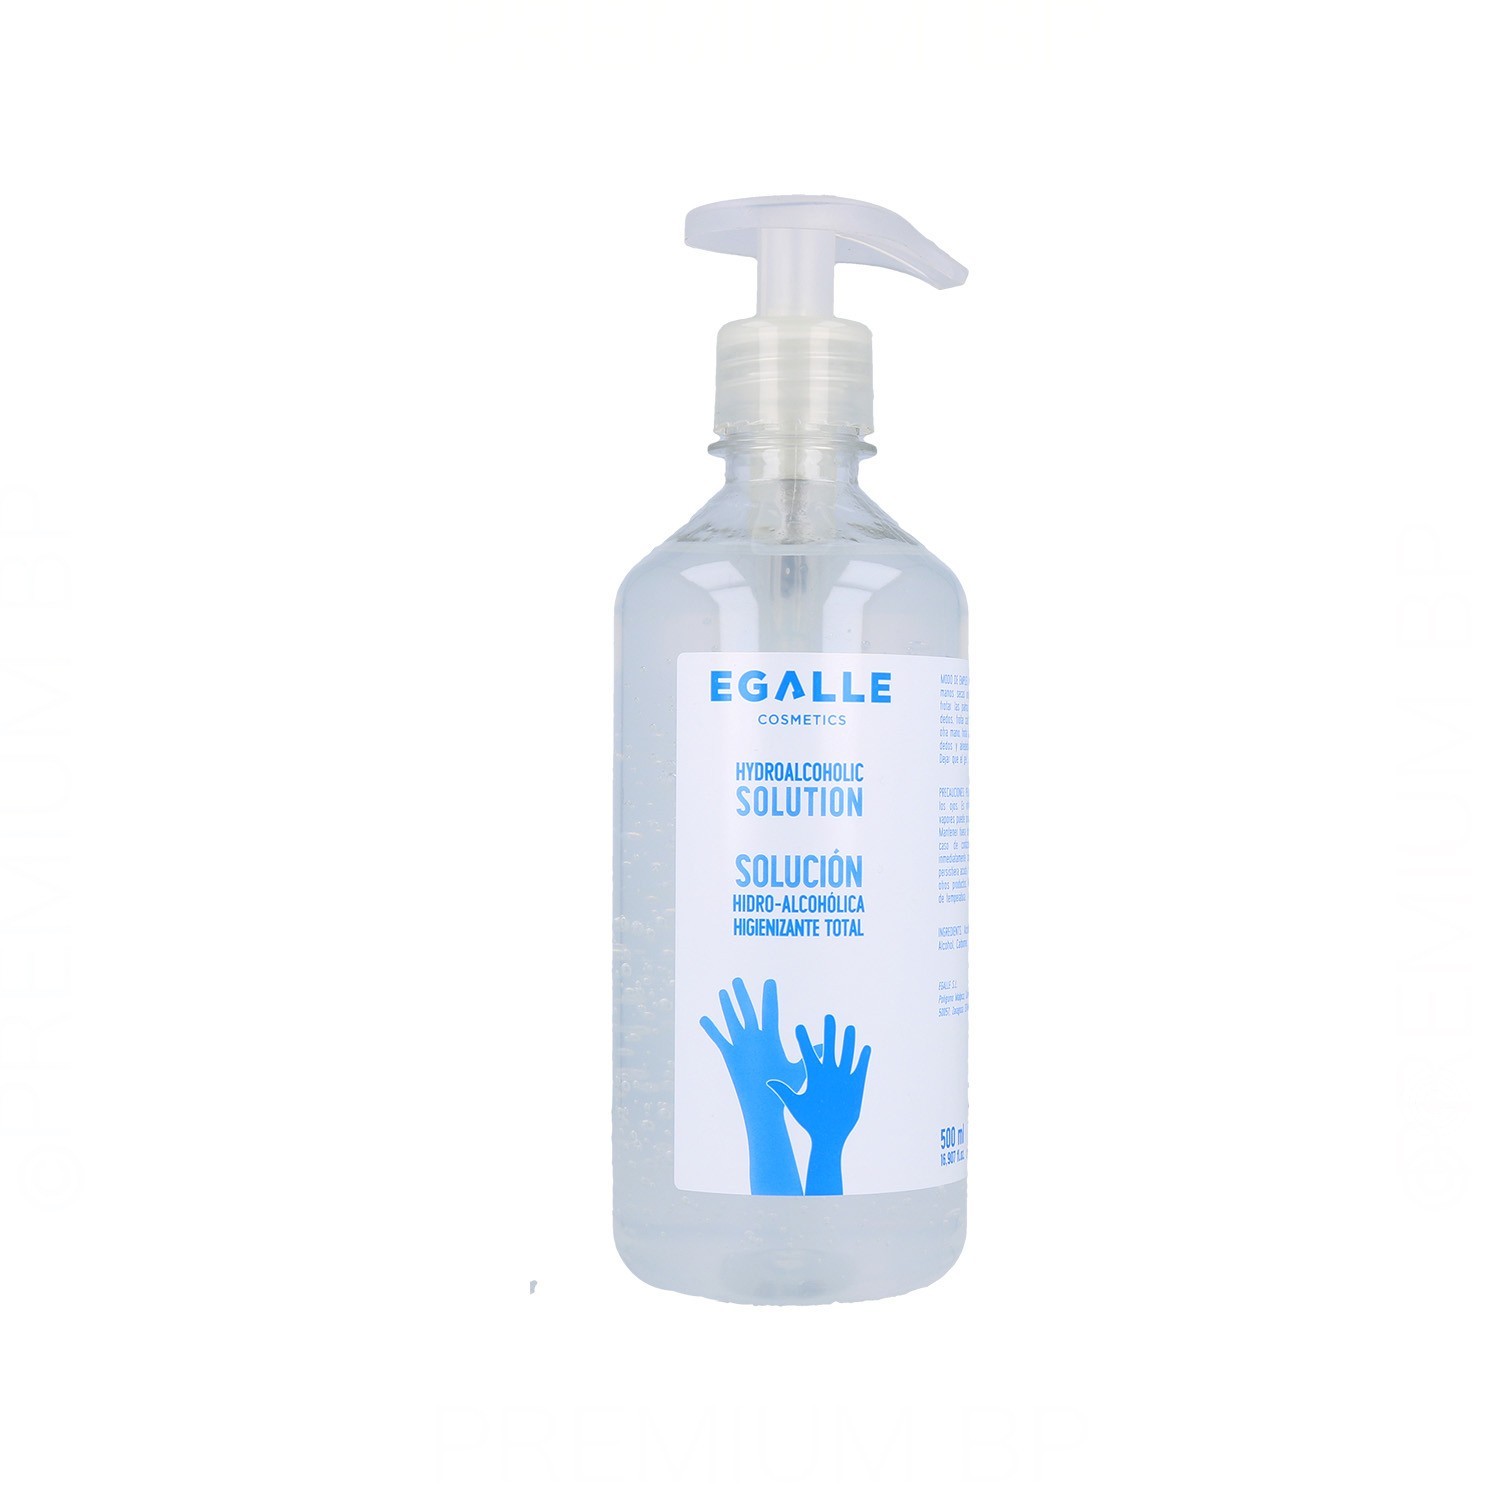 Egalle Solution Hydro-alcoholic 500 ml (Sanitizer)